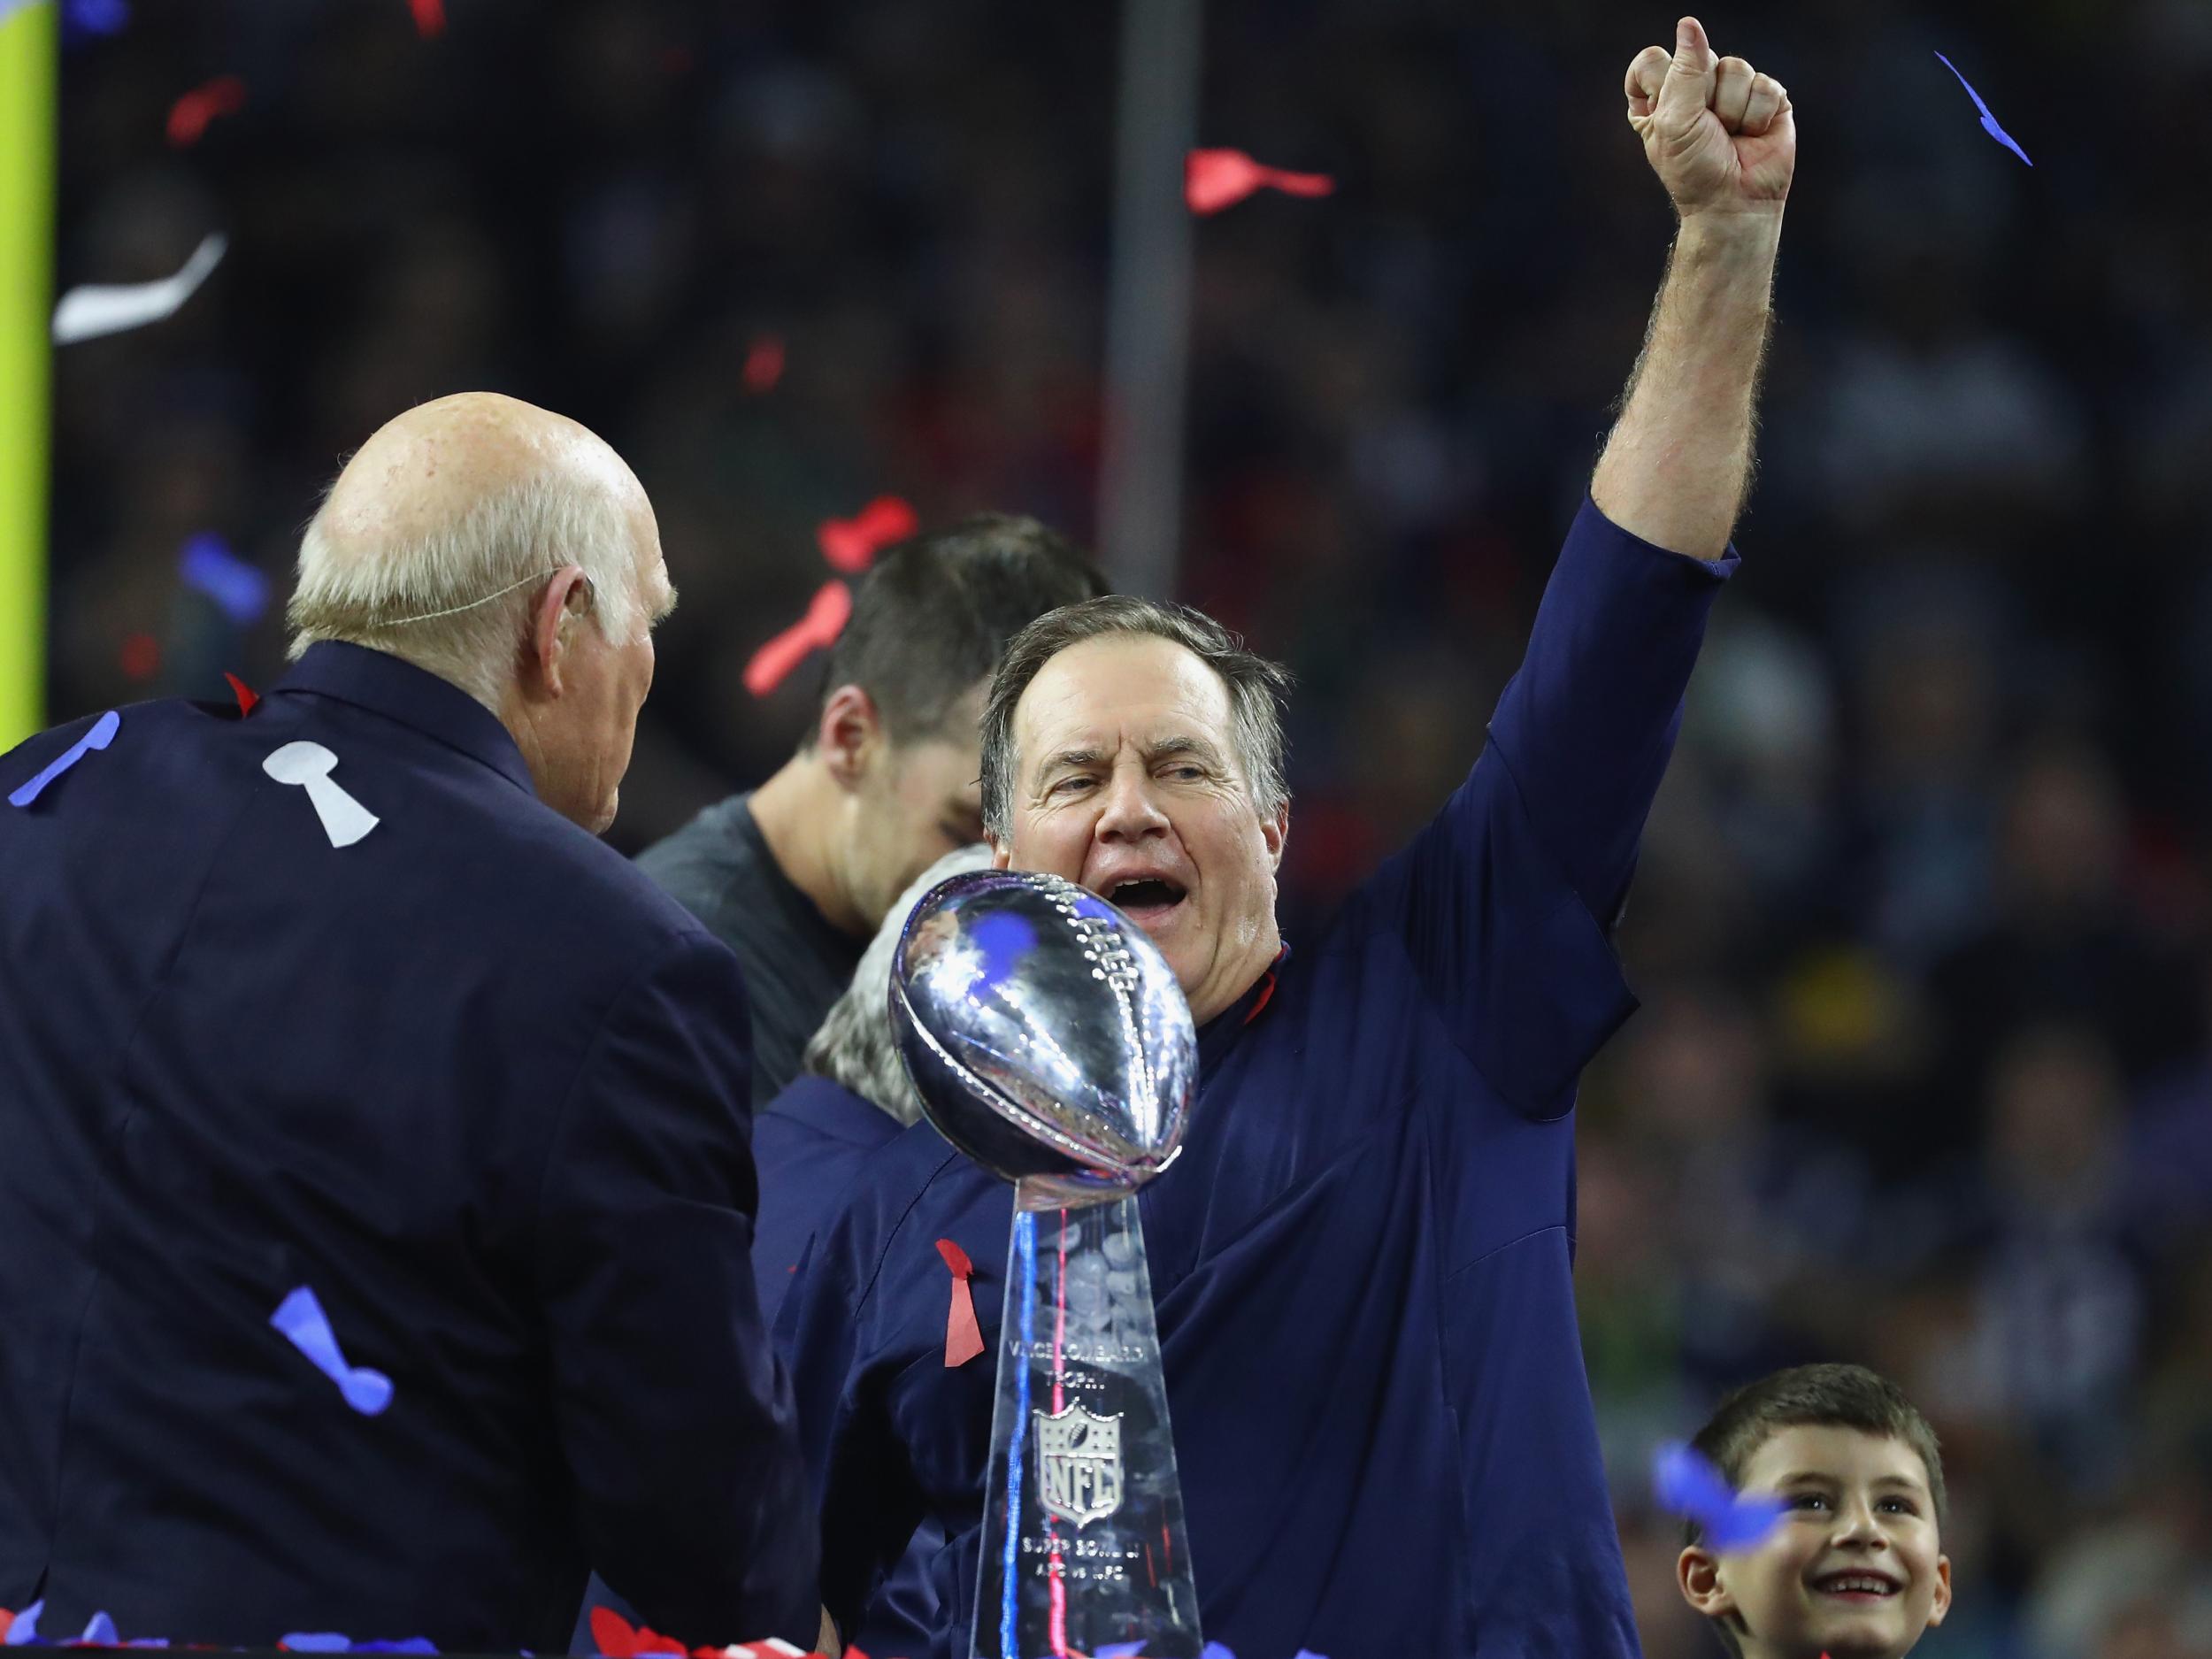 Belichick has now won more Super Bowls than any other coach